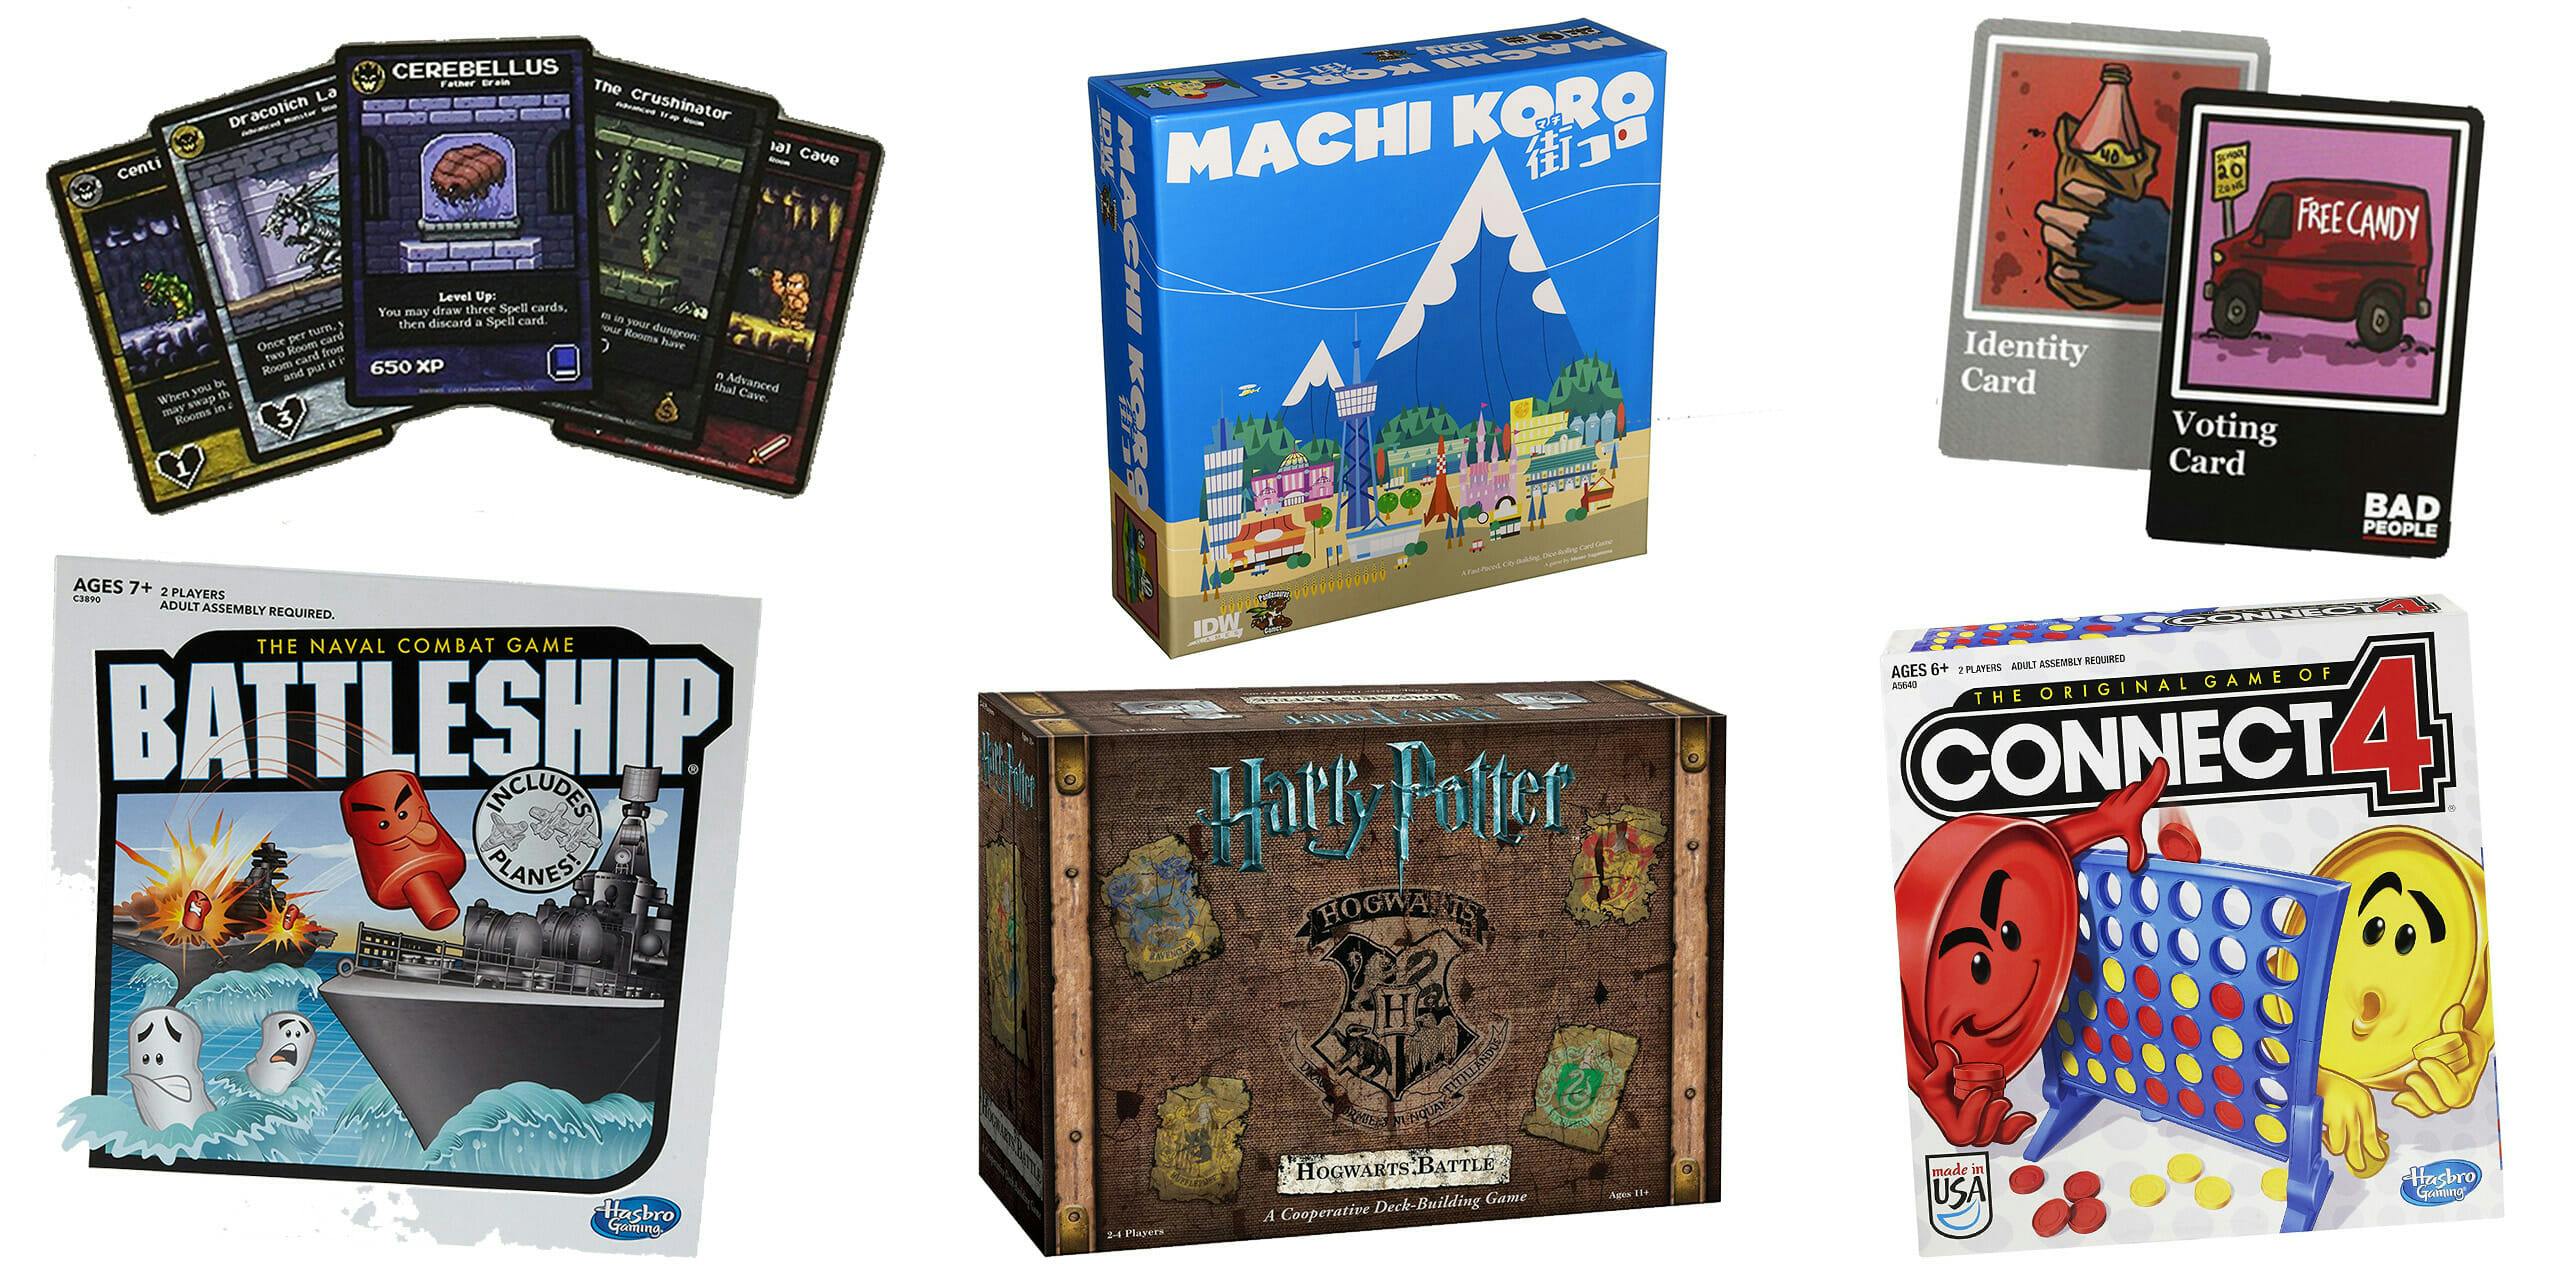 2-player board games that probably won't ruin your friendships